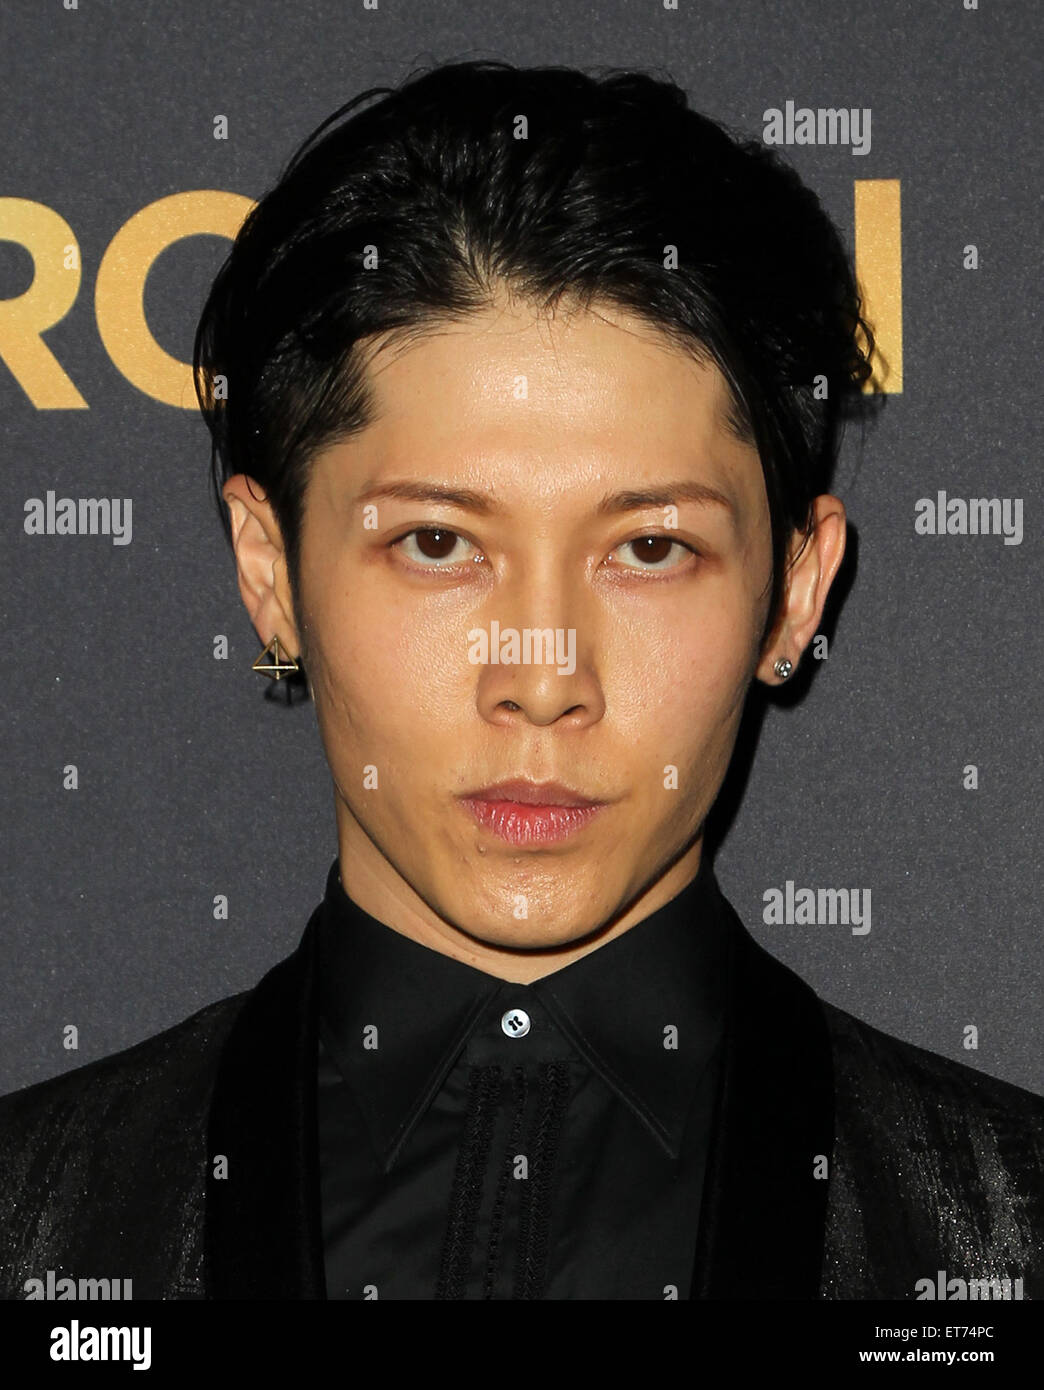 Los Angeles premiere of 'Unbroken' at the Dolby Theatre - Arrivals  Featuring: Miyavi, Takamasa Ishihara Where: Los Angeles, California, United States When: 15 Dec 2014 Credit: FayesVision/WENN.com Stock Photo